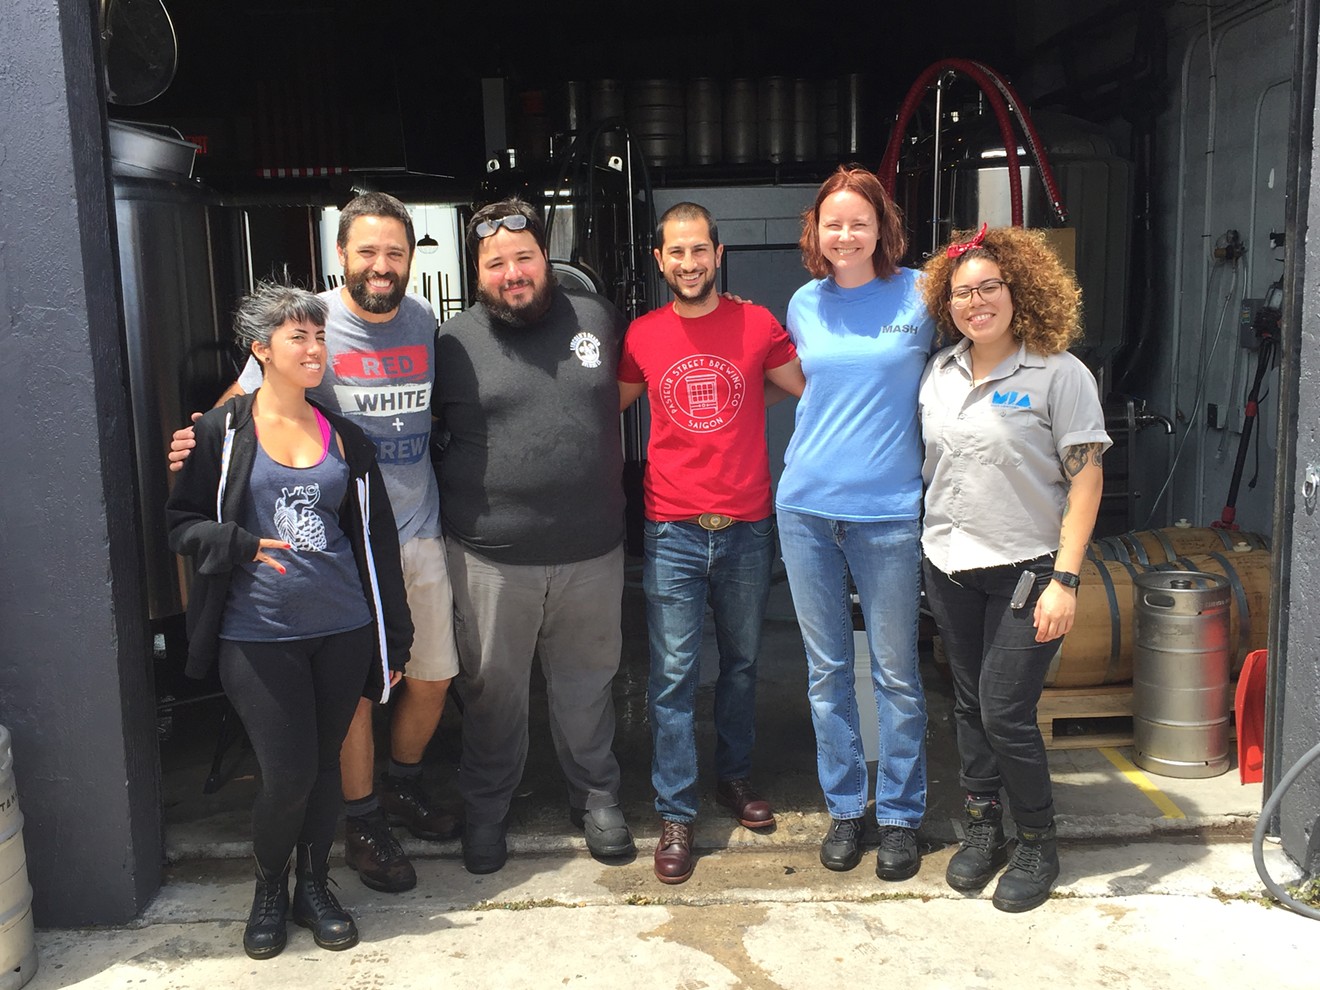 Josh Hubner (in the red shirt) and the brew crews from Lincoln's Beard Brewing and M.I.A. Beer Company.